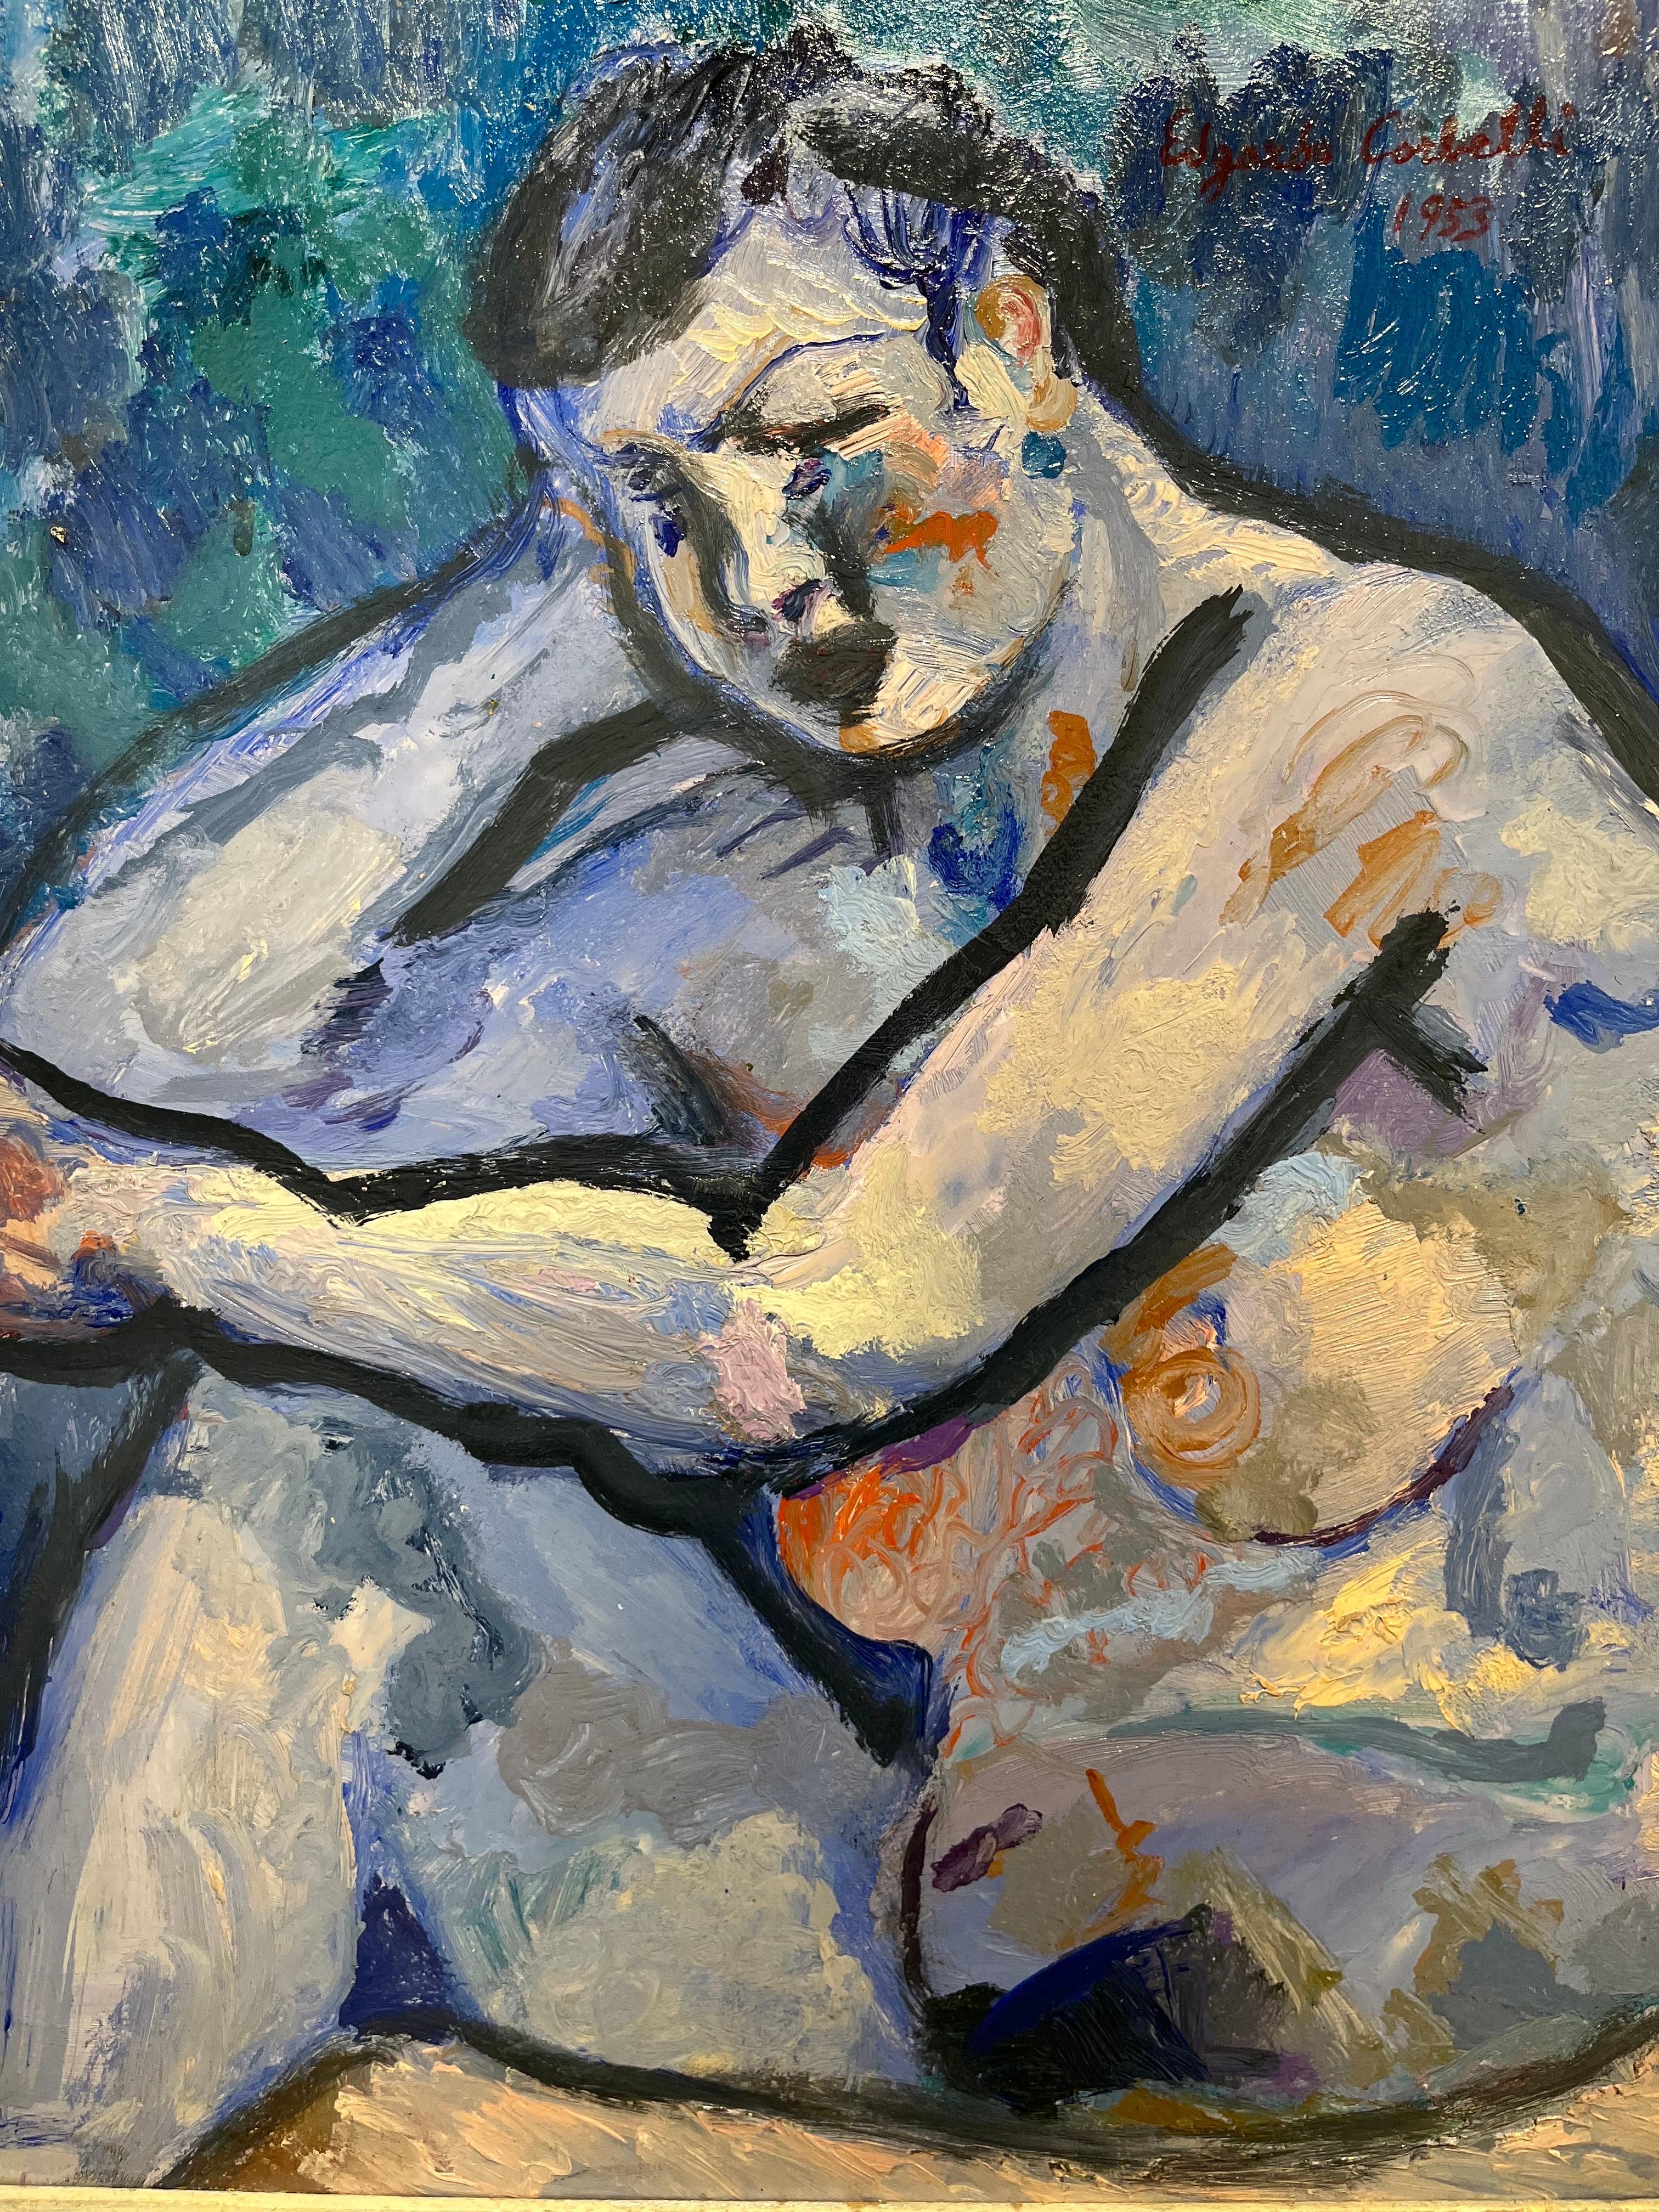 blue,nude
Edgardo CORBELLI (Turin, 1918 - 1989)

From the traditional composition of the 1930s, the painting of Corbelli leads to technical and expressive results dominated by an impetuous sign assimilated, among others, by Oskar Kokoschka at the